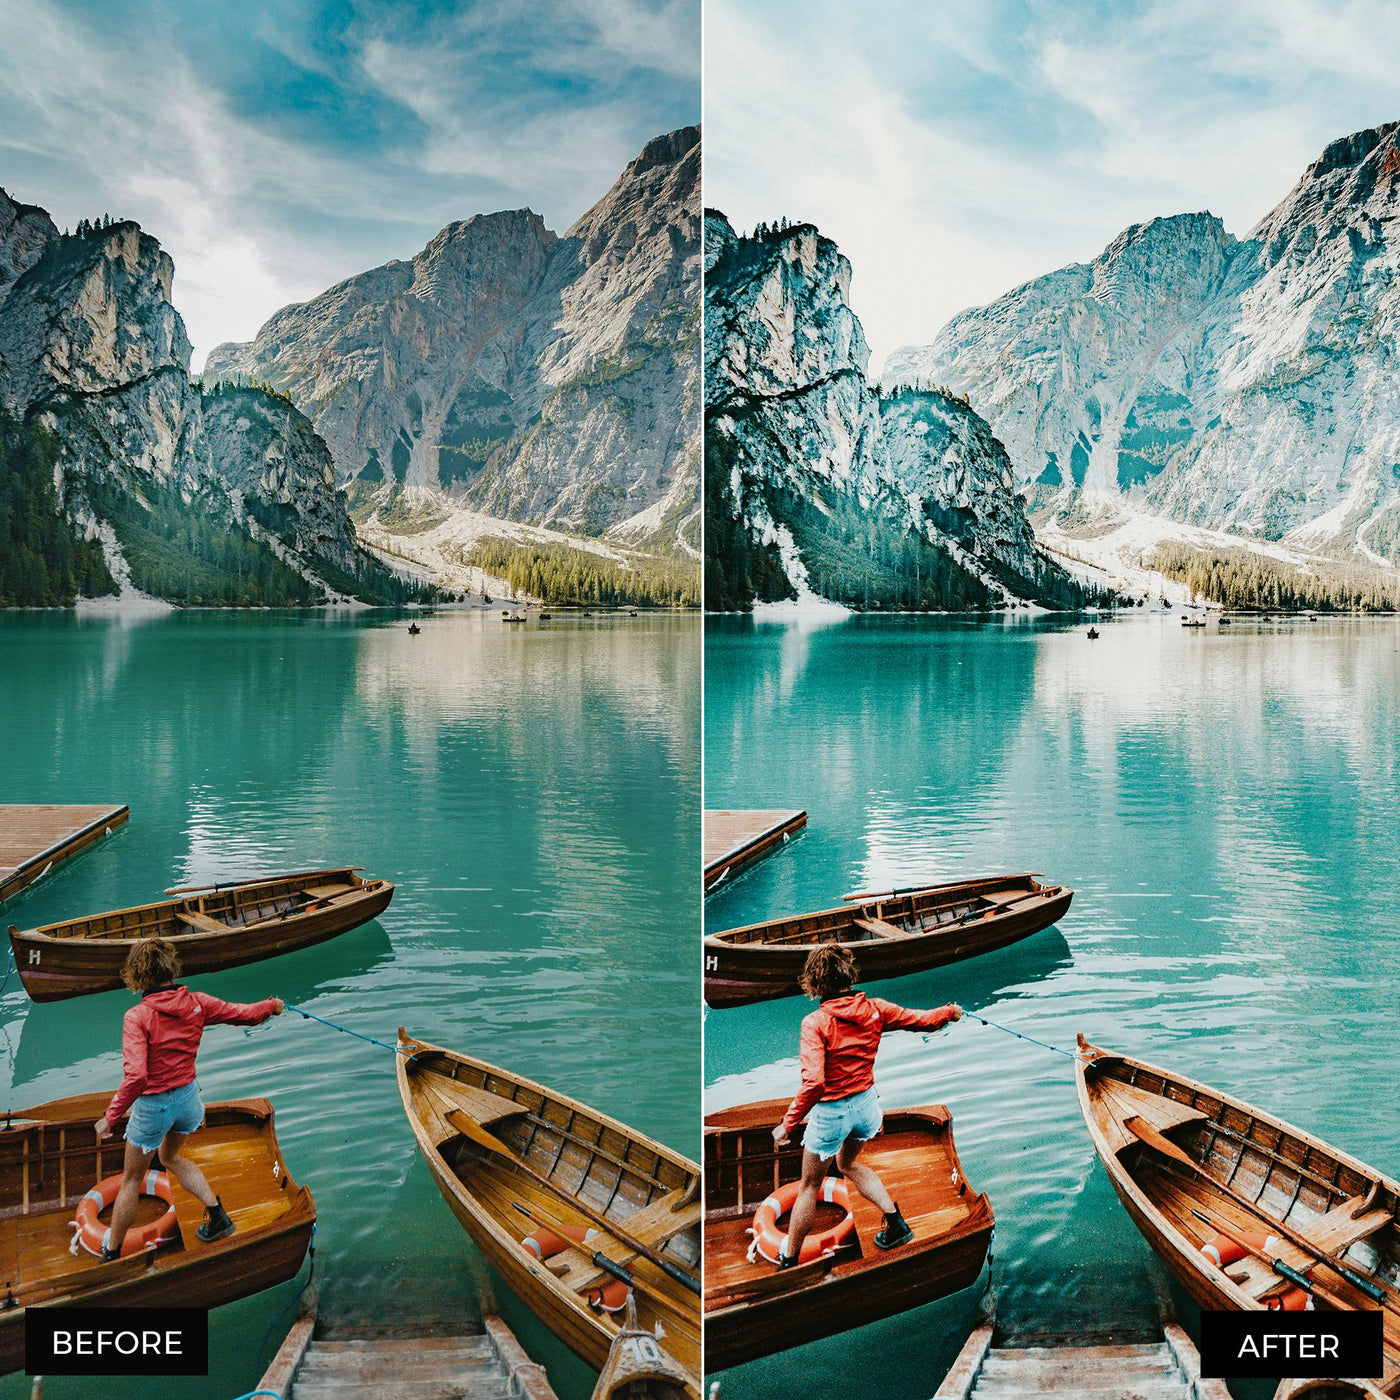 Nature Lightroom Presets Collection